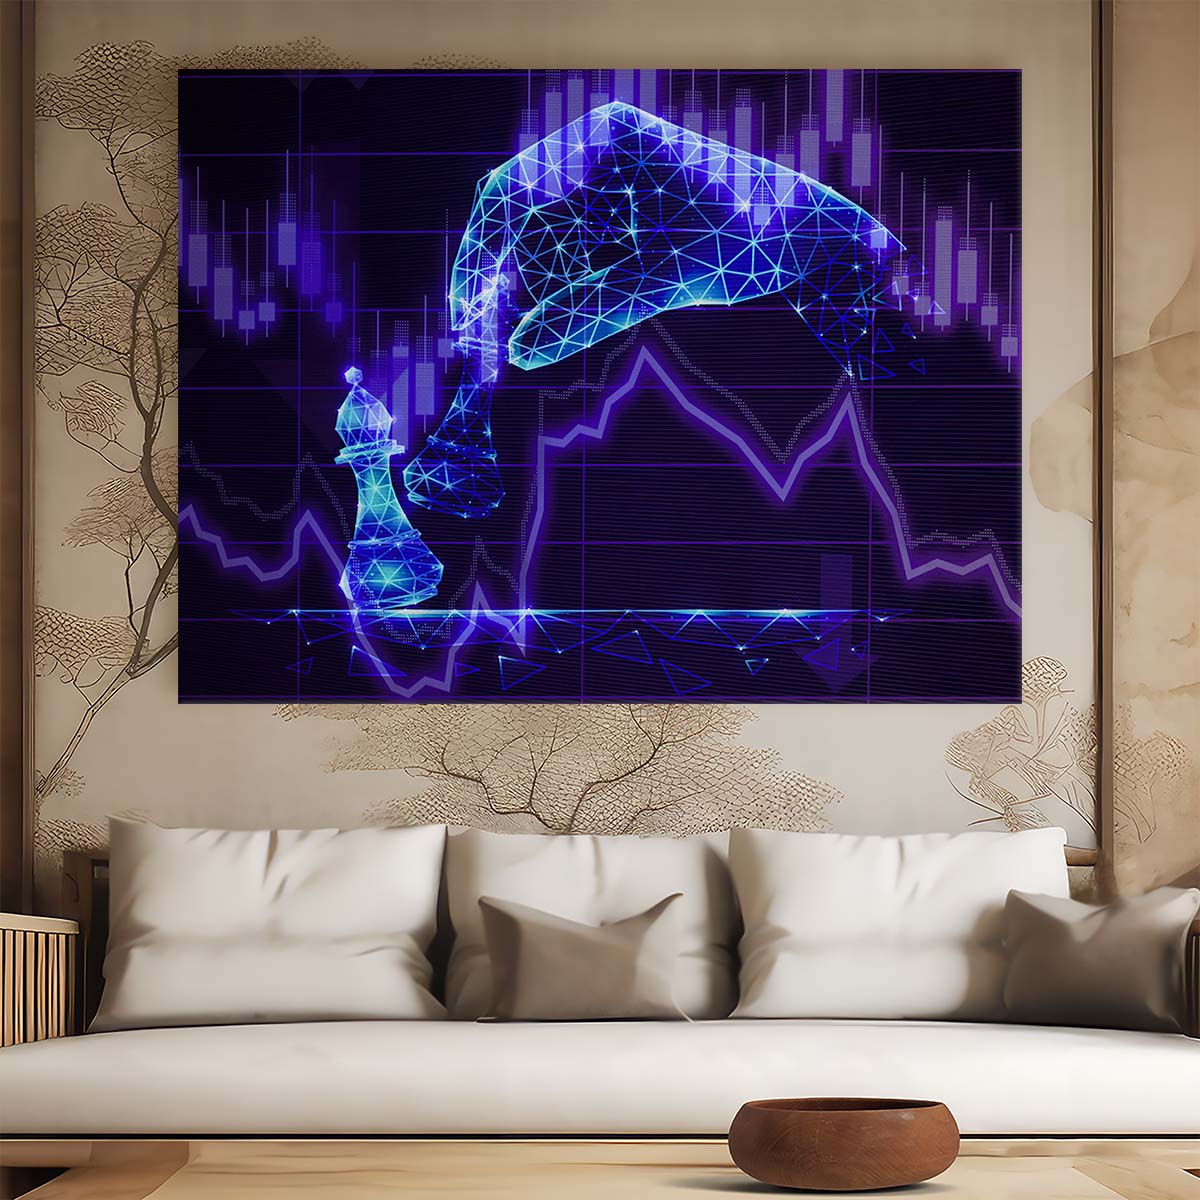 Stock Market Trading Strategy Wall Art by Luxuriance Designs. Made in USA.